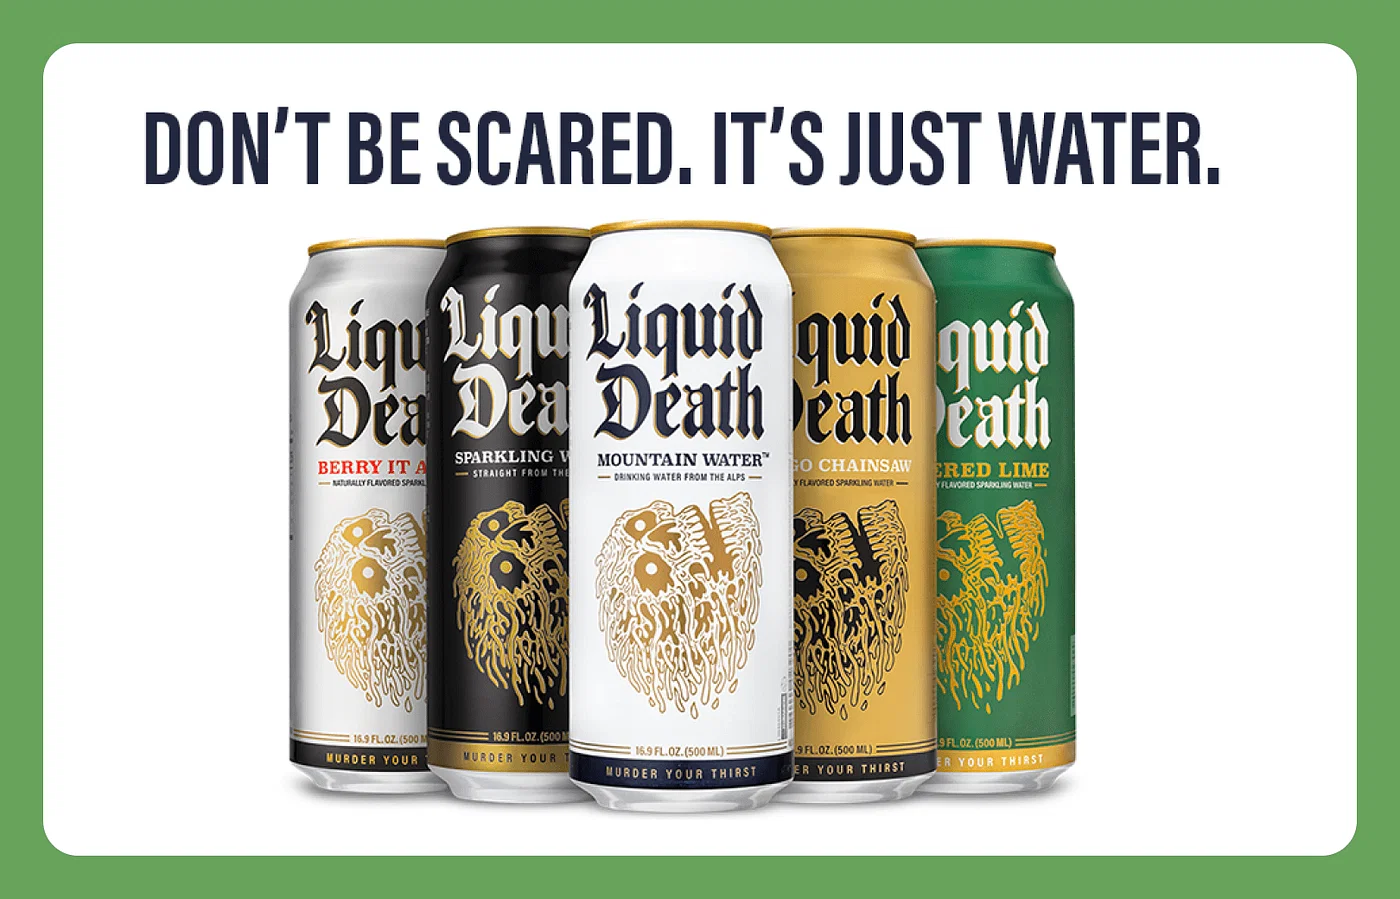 Liquid Death's beer ad featuring 'Don't be scared. It's just water' tagline and 5 varieties of their canned beer, including grey, black, white, yellow and green cans.